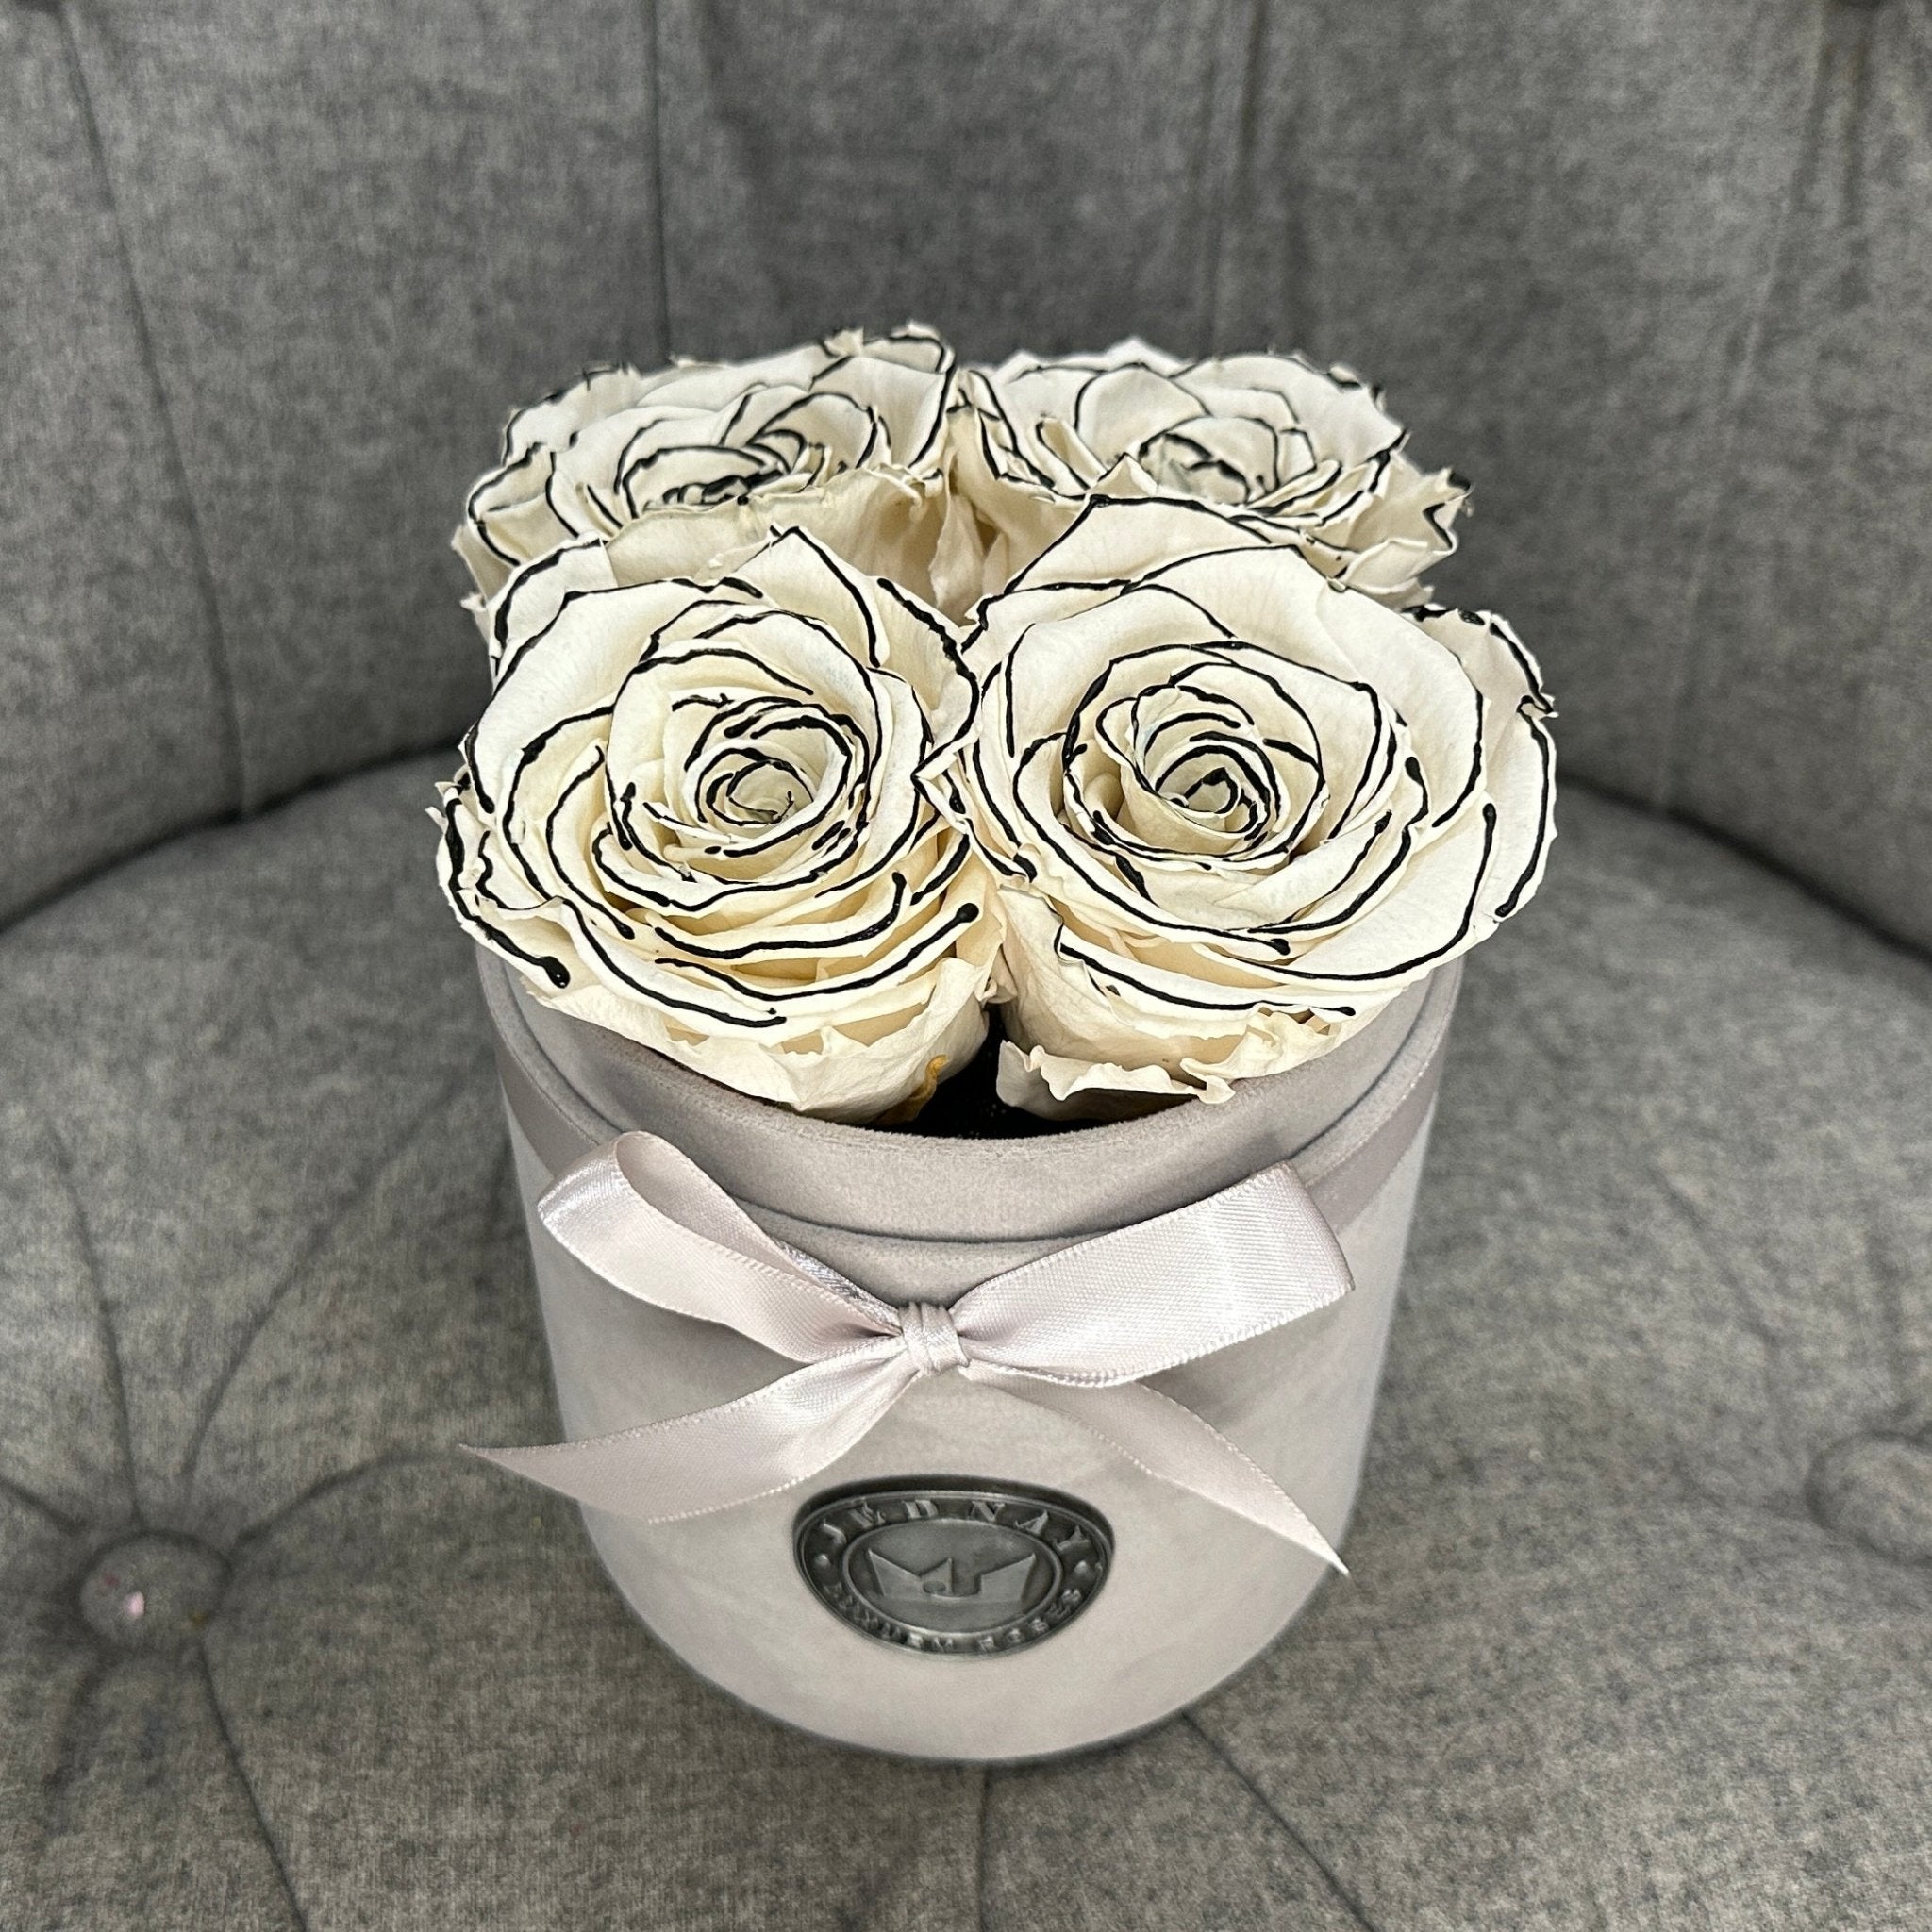 Petite Grey Suede Forever Rose Box - Sketchy Eternal Roses - Jednay Roses